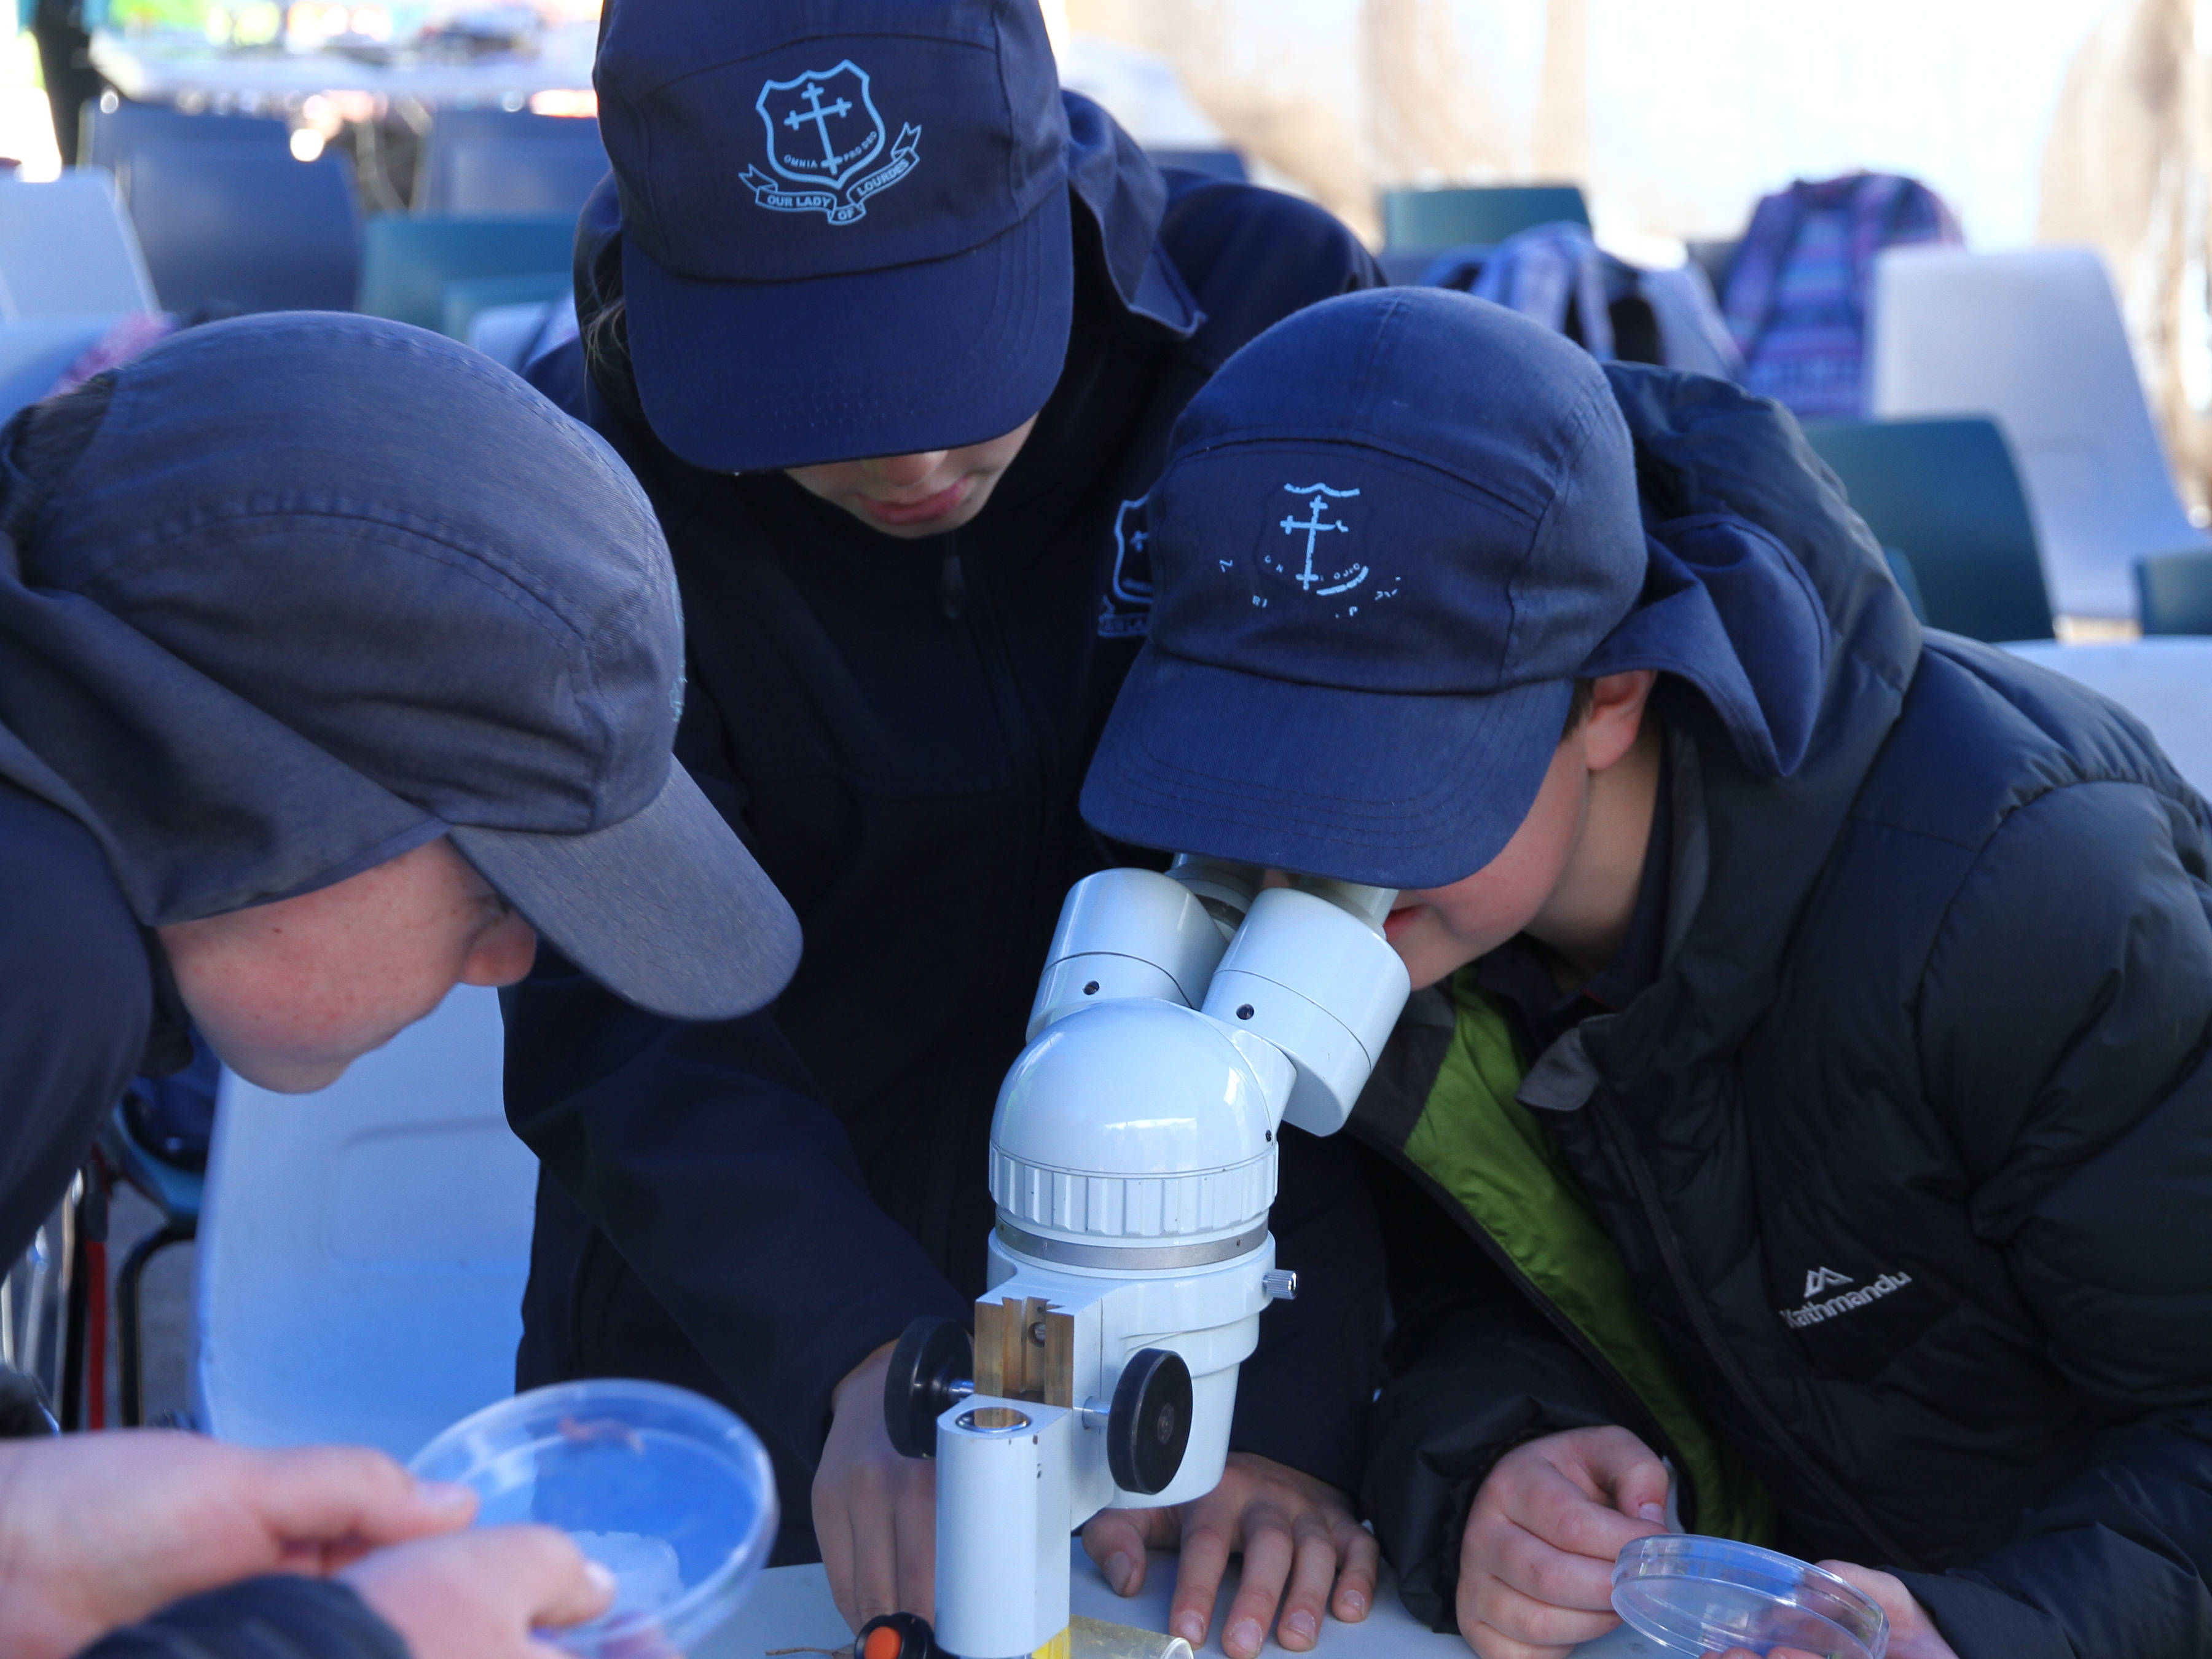 Three school students in blue school uniforms participating in an outdoor discovery session for Exhibition Class. One is looking into a microscope and one is holding a petri dish. The third is looking on with interest.